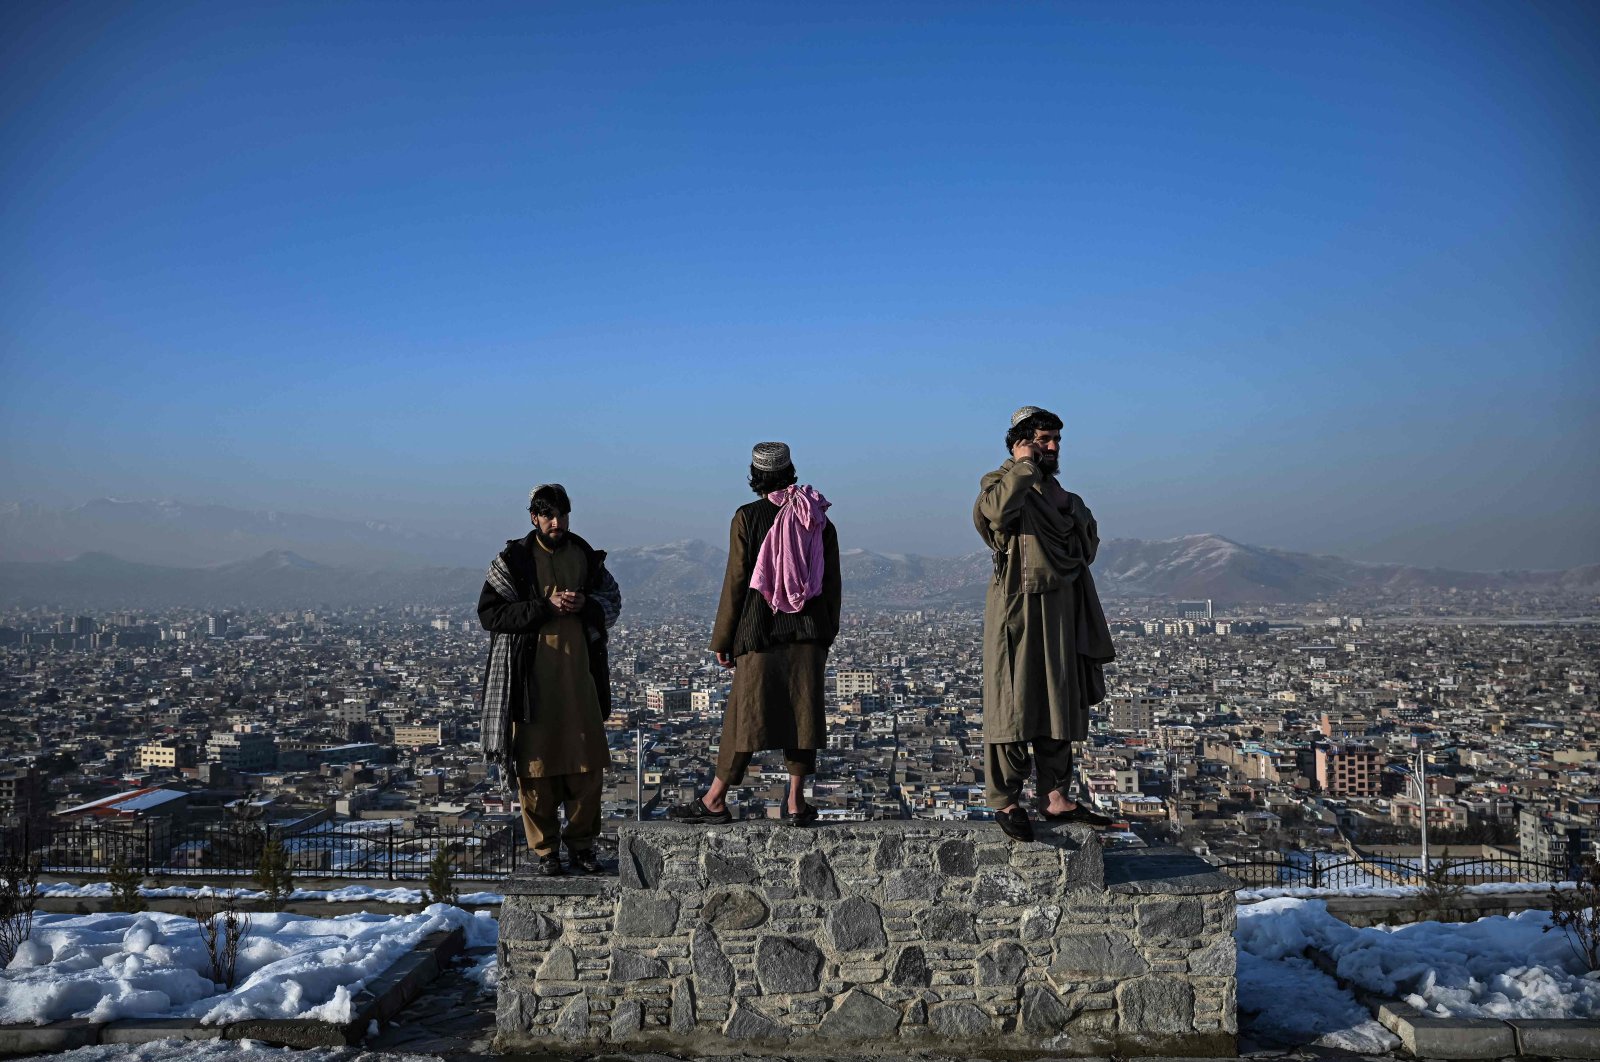 Members of the Taliban stand over a plinth overlooking Kabul city at the Wazir Akbar Khan hill in Kabul, Afghanistan, Jan. 10, 2022. (AFP)